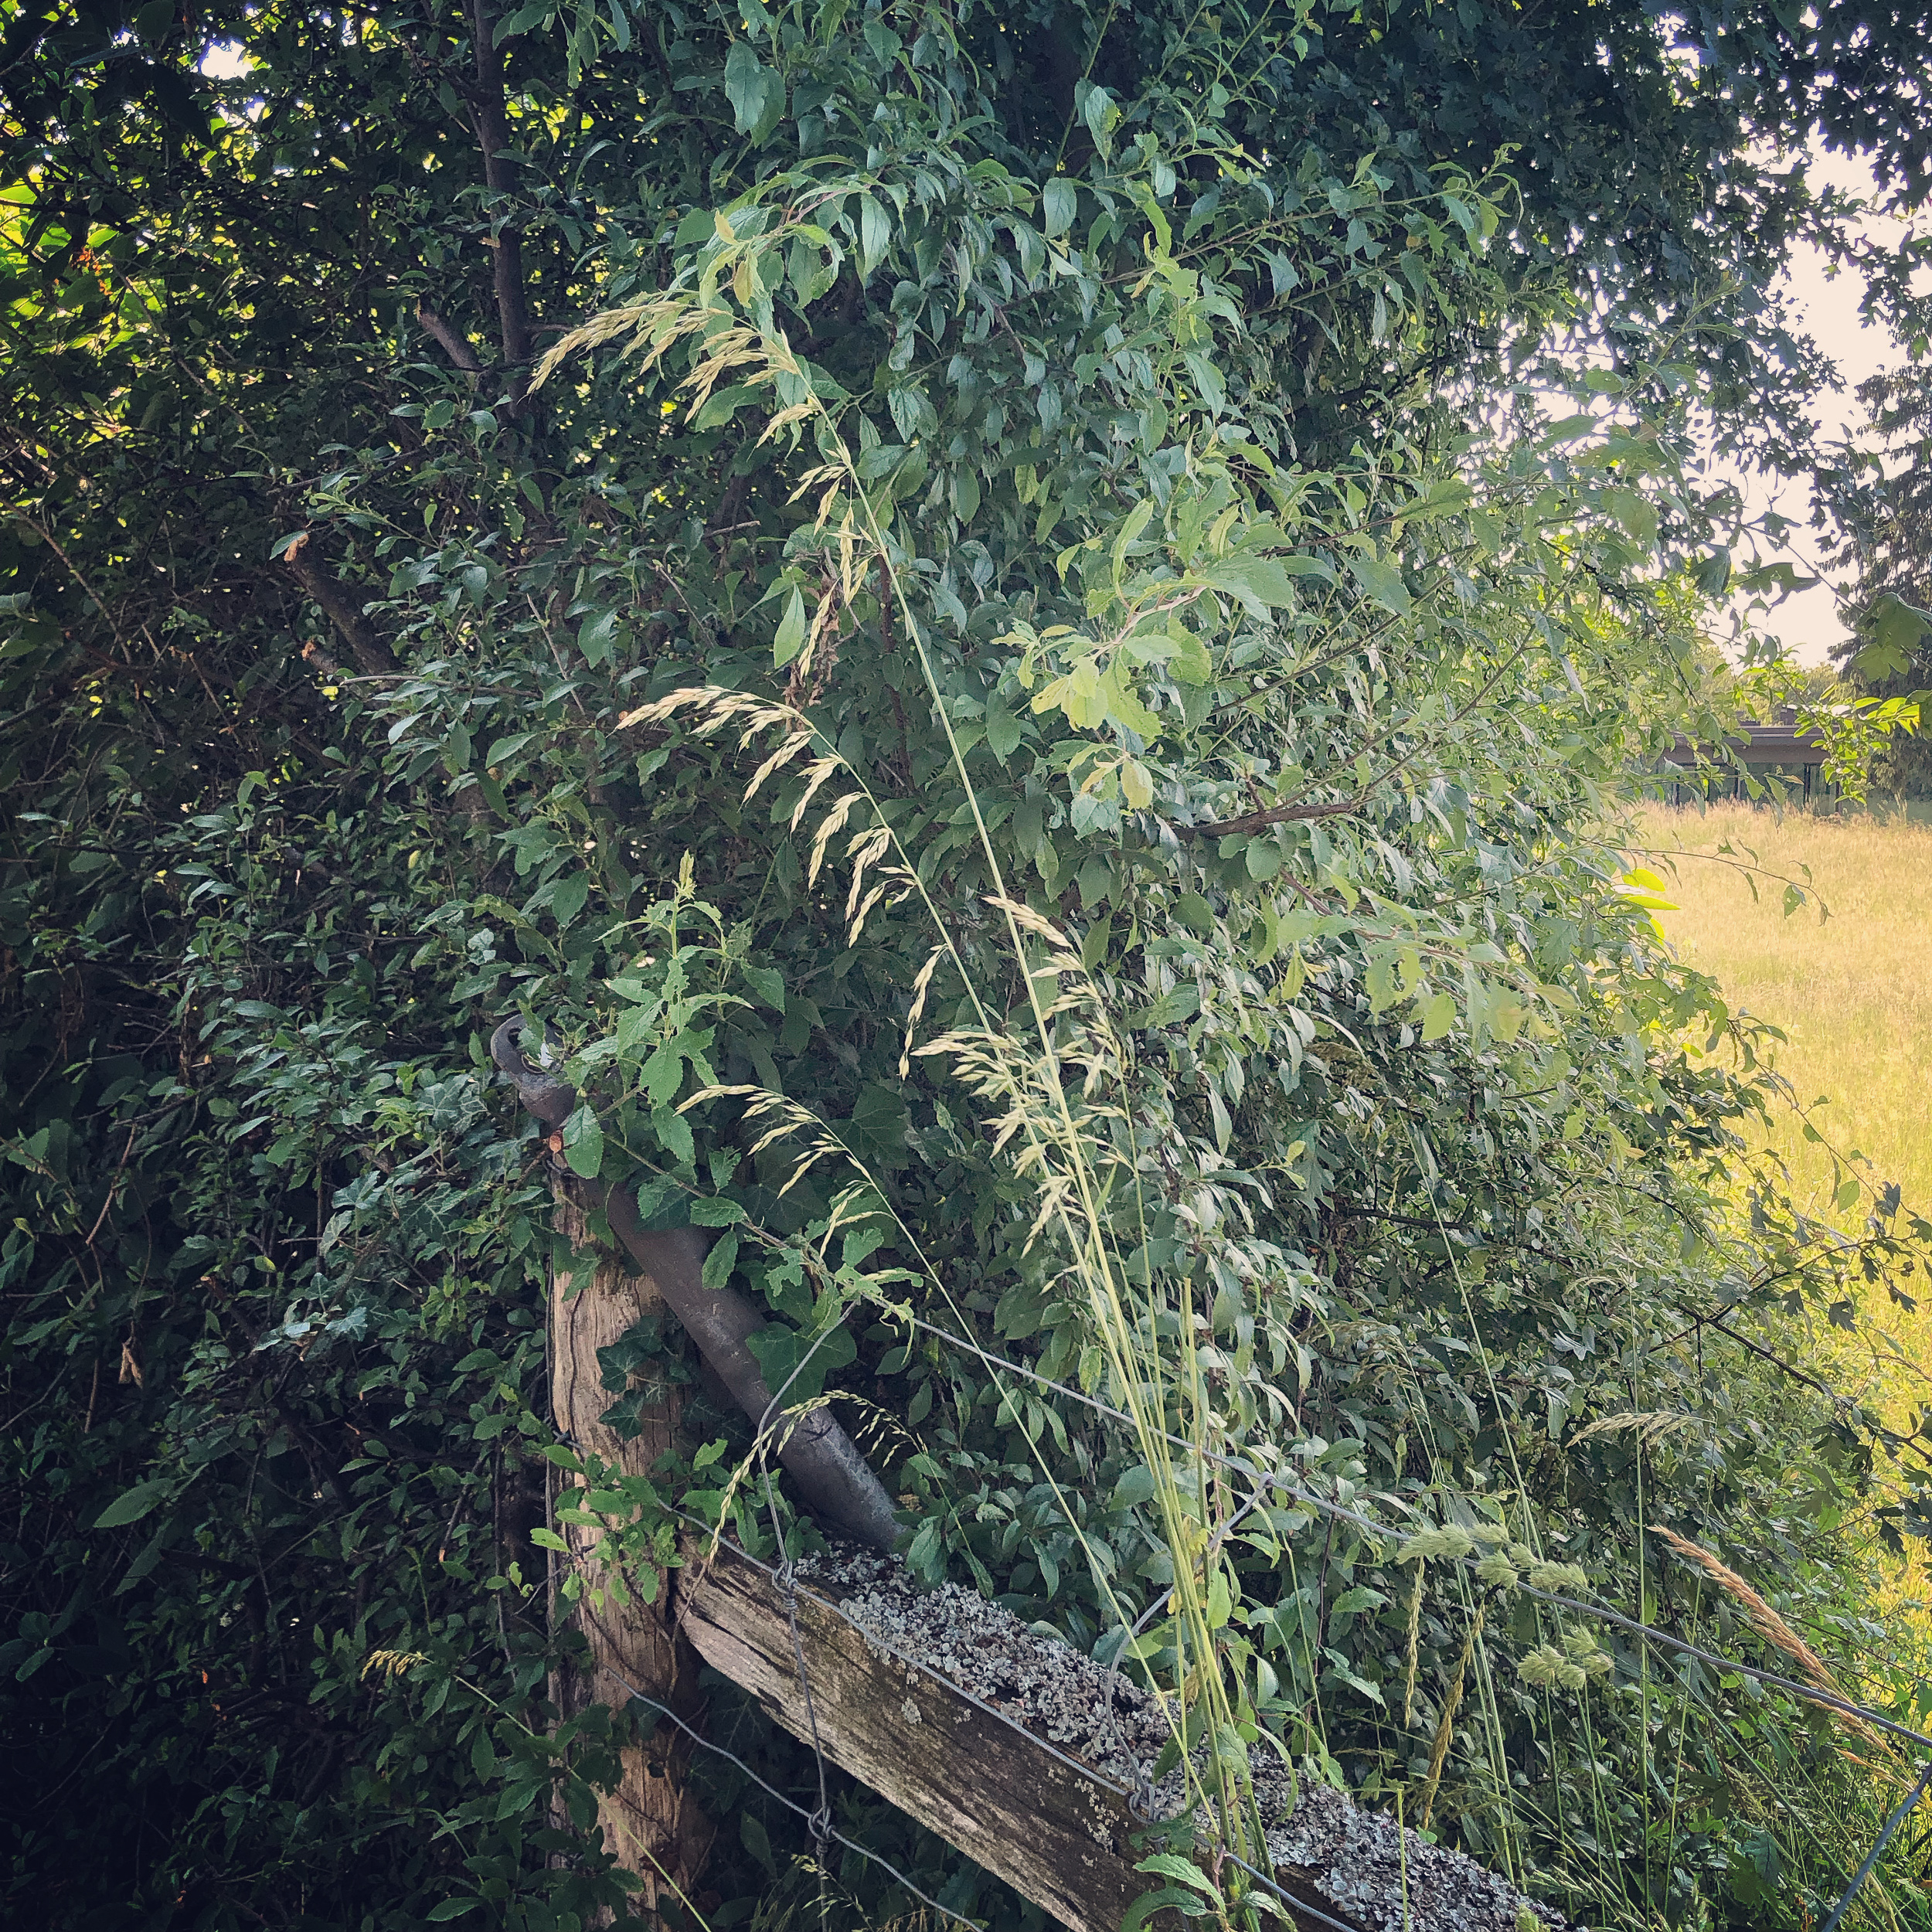 The edge of the hedge